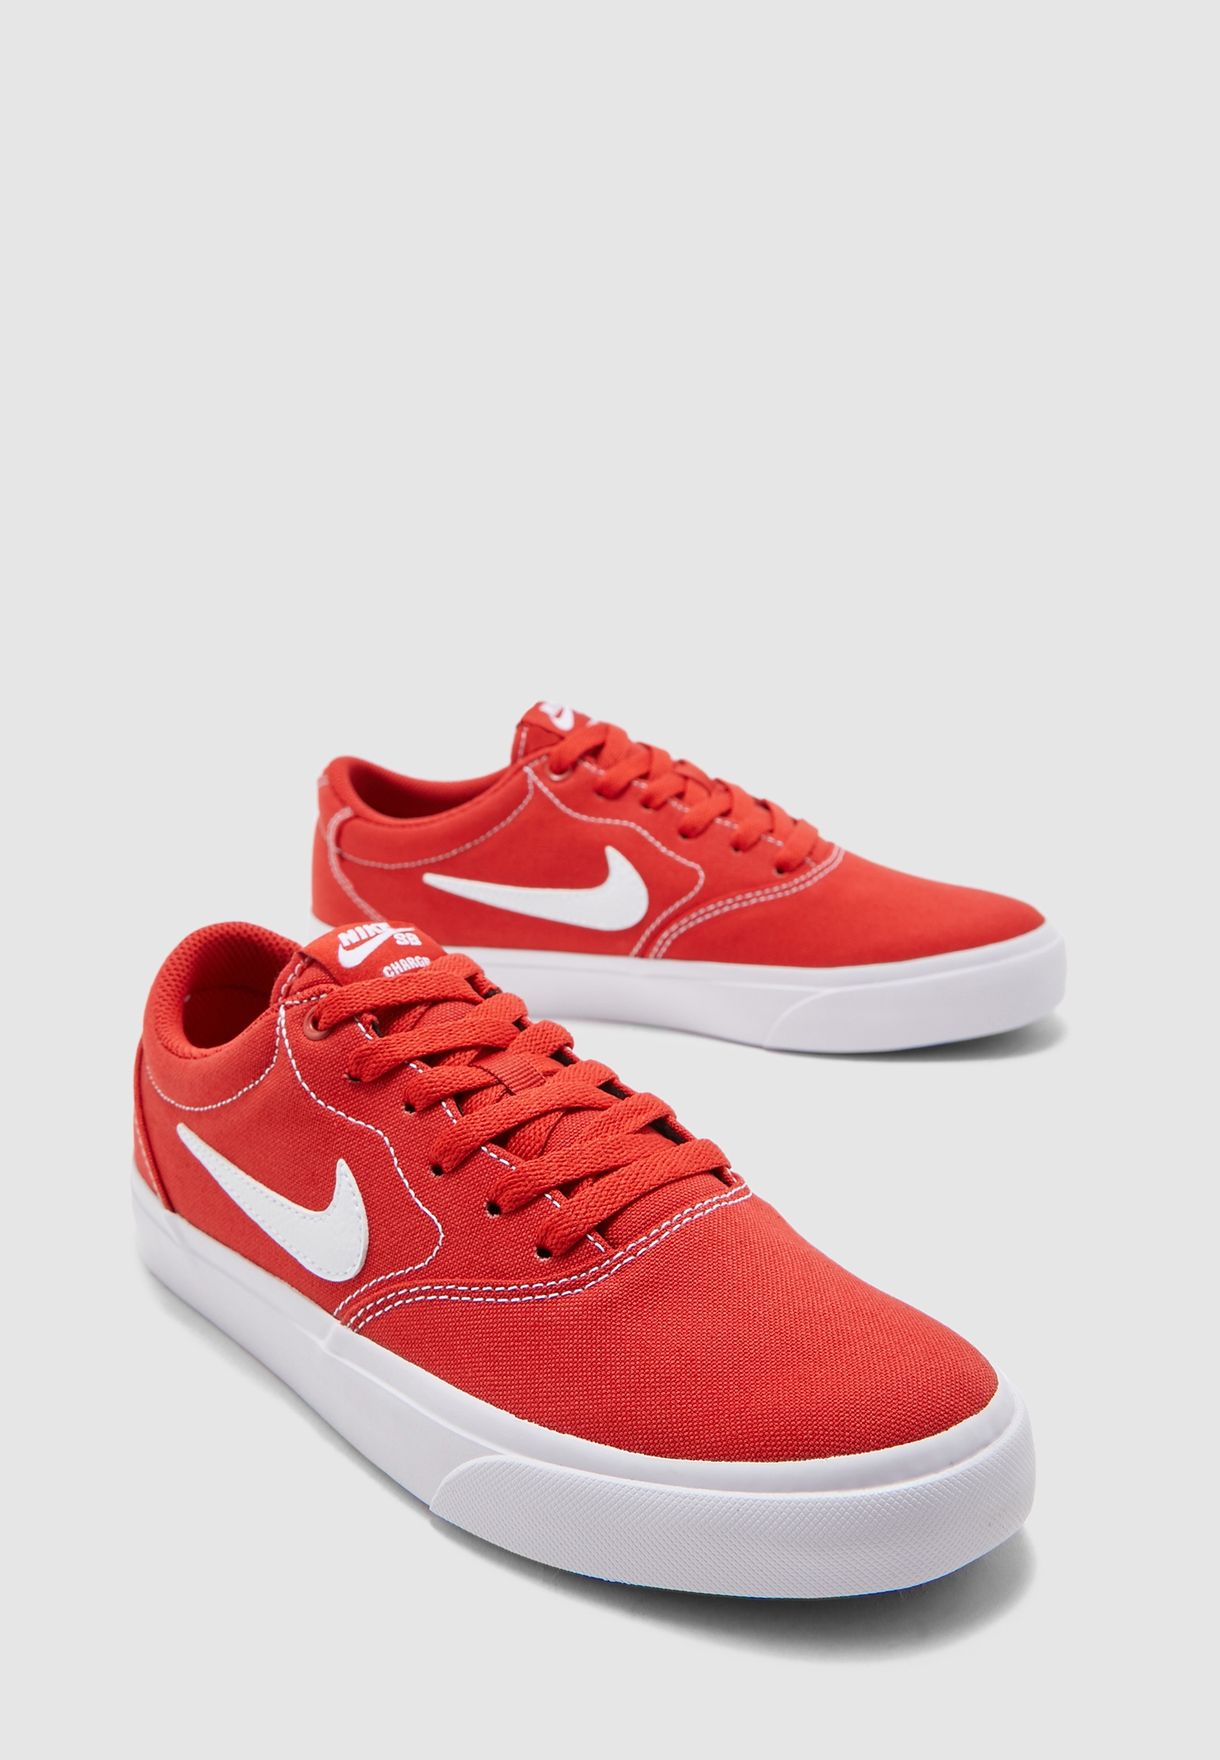 red nike skate shoes 